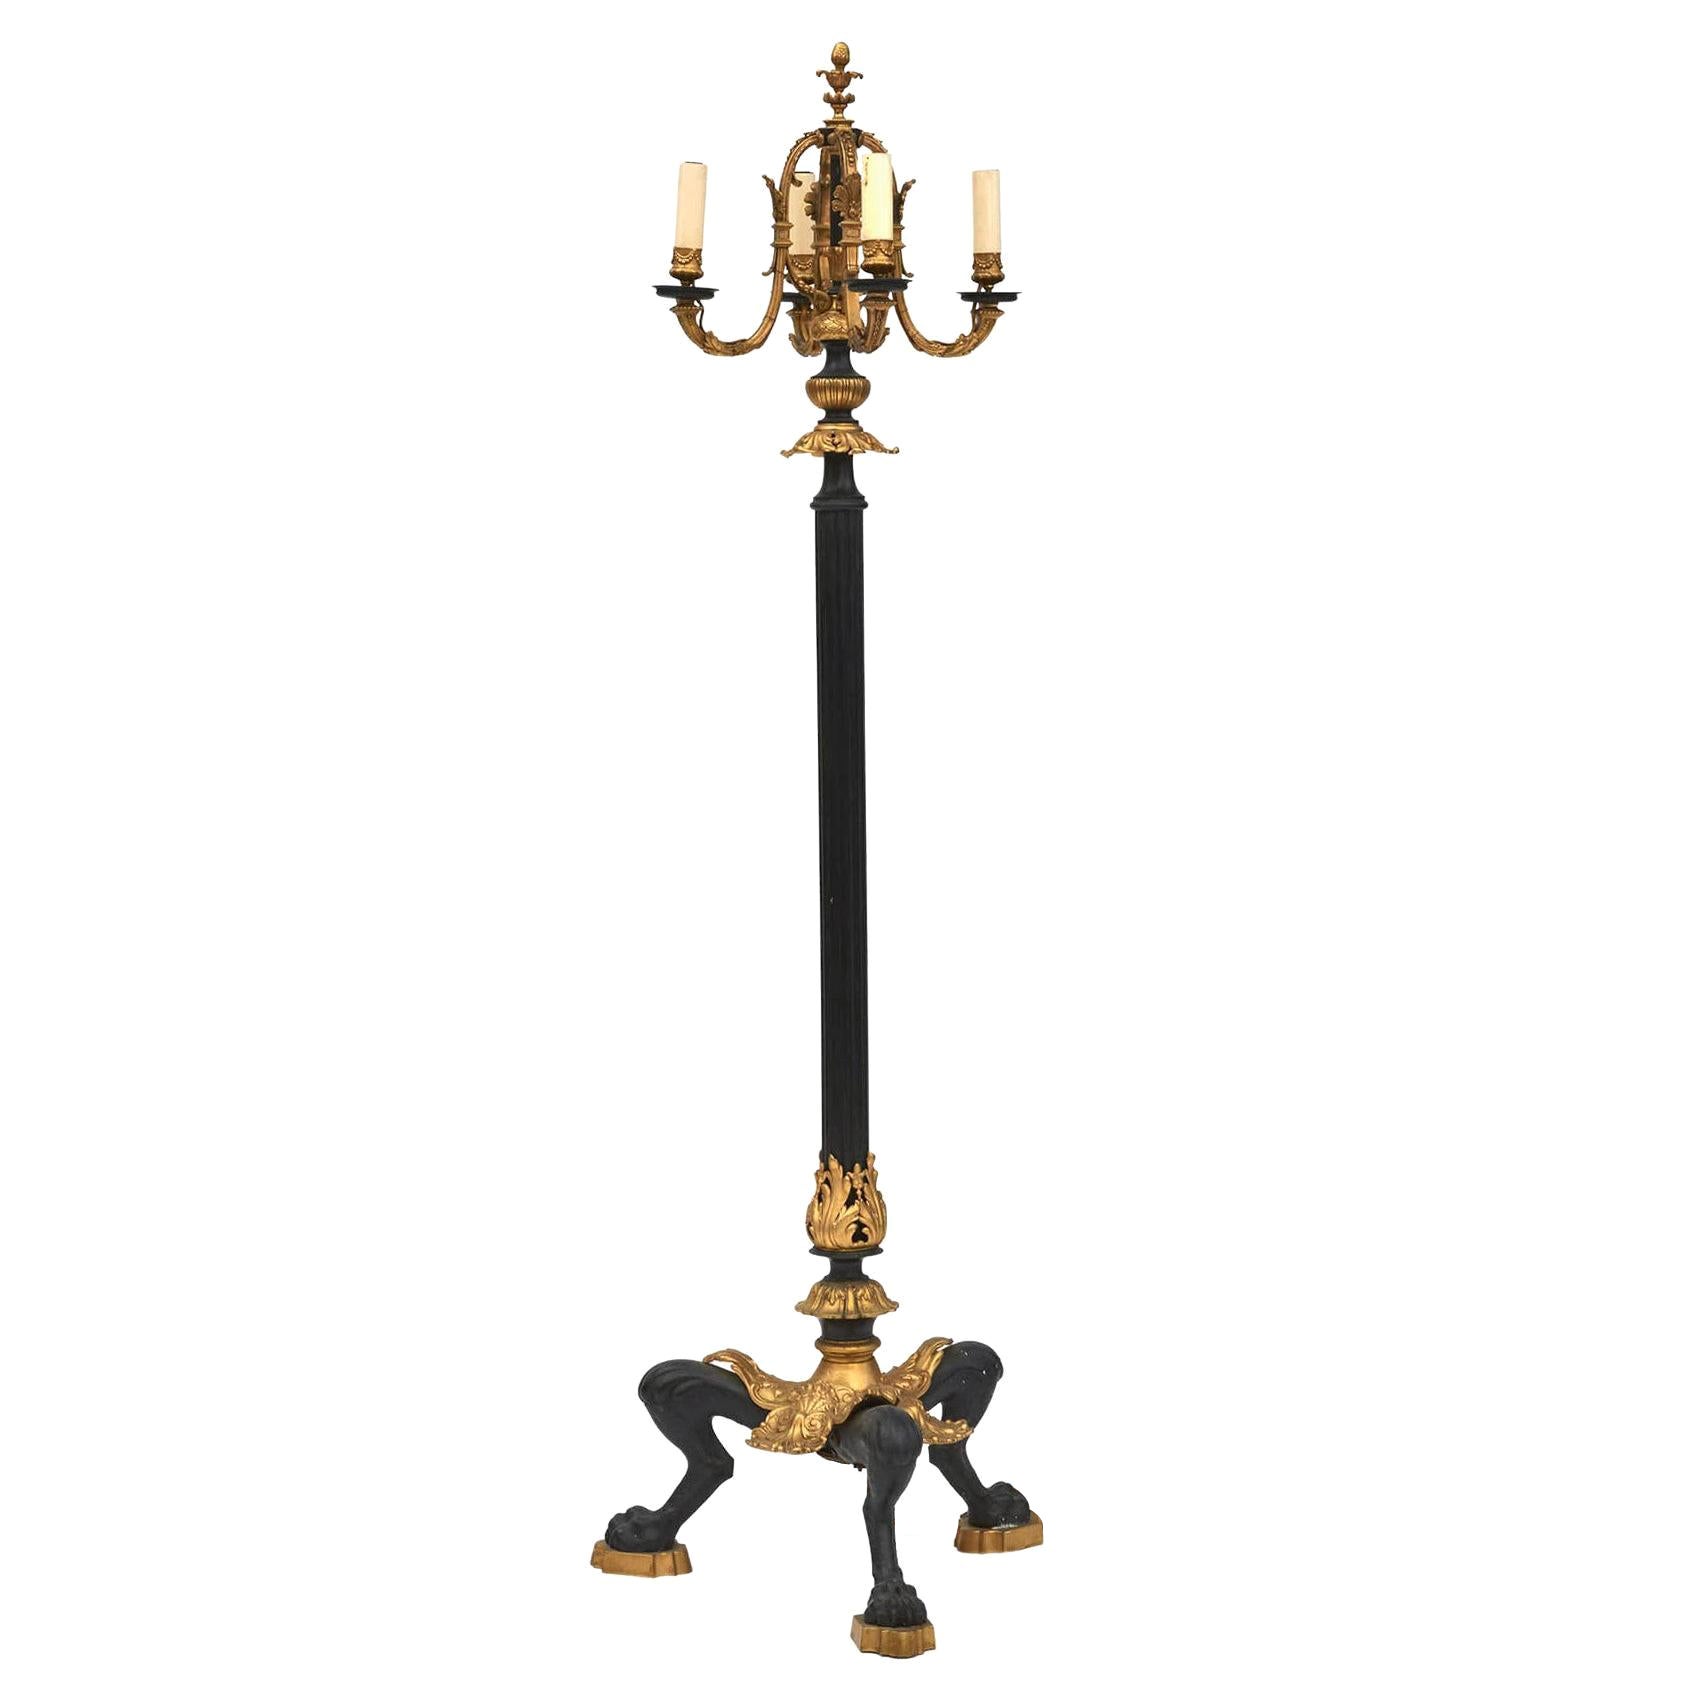 French Louis XVI Style Gilt and Black Painted Bronze Floor Lamp